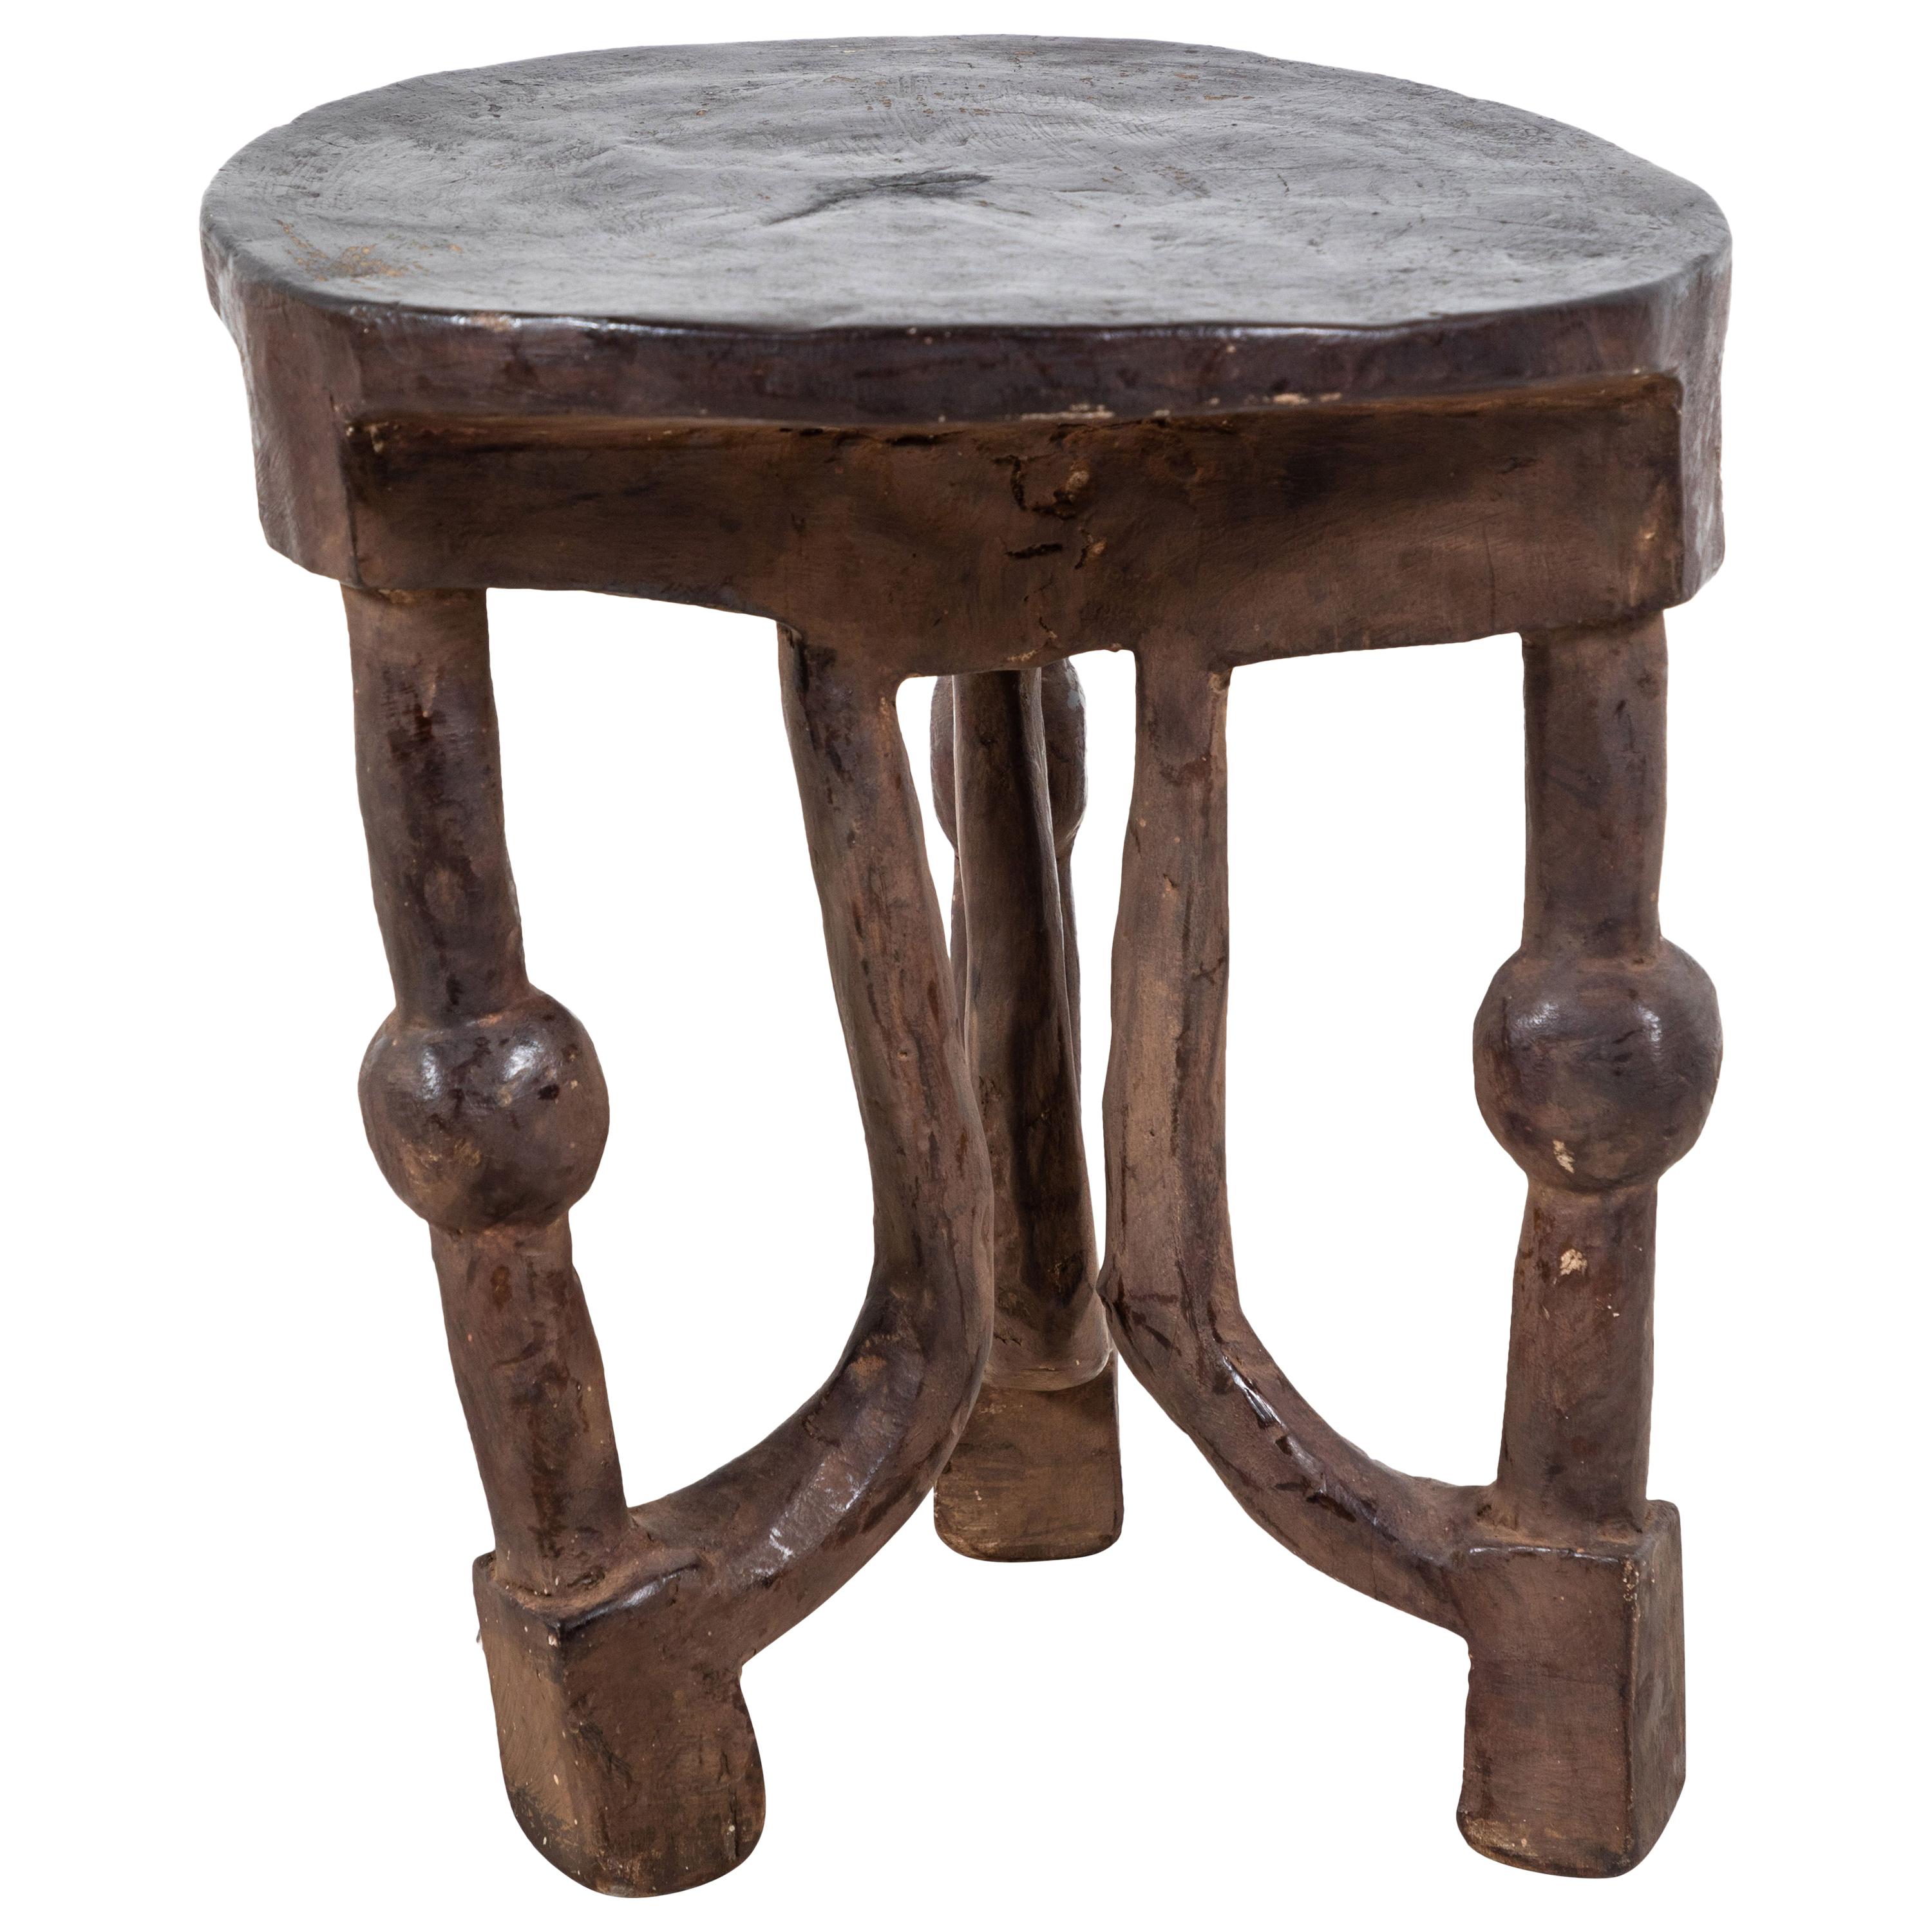 Round African Stool from Tanzania